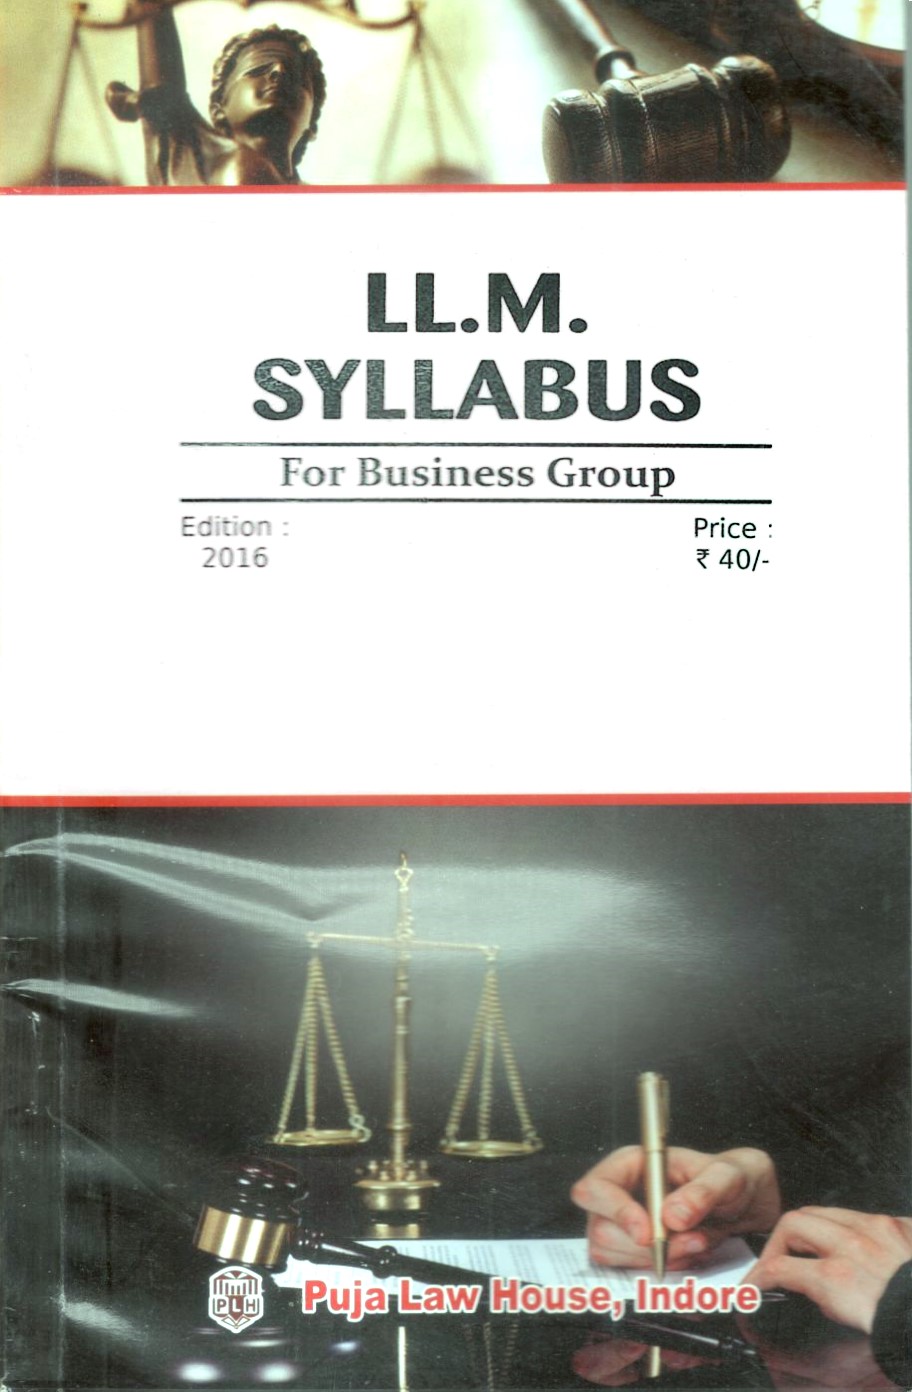  Buy LL.M. Syllabus For Business Group